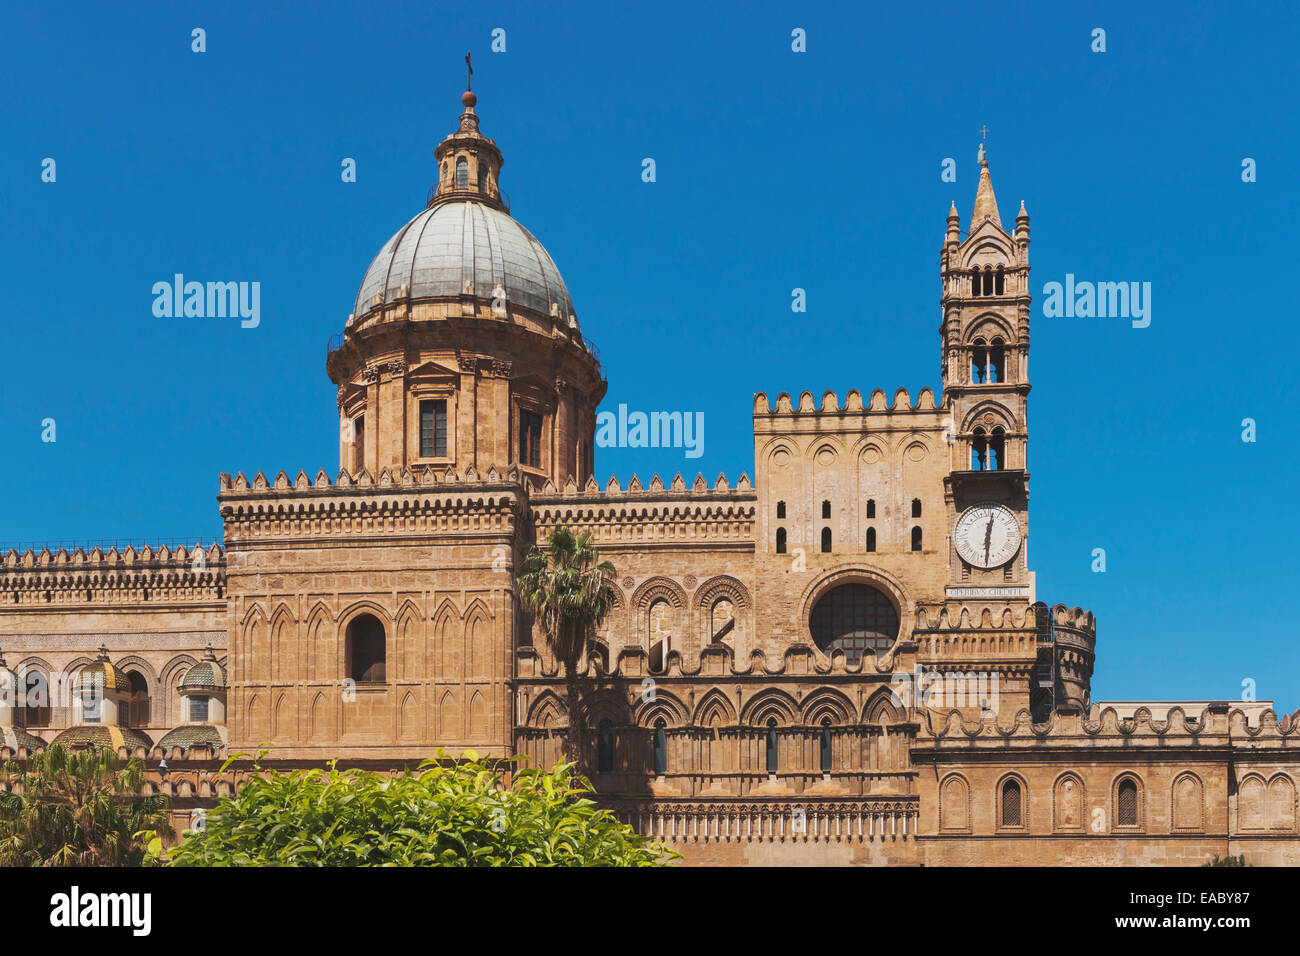 Palermo Cathedral was built in 1185 in the Norman-Arab style and was rebuilt several times, Palermo, Sicily, Italy, Europe Stock Photo